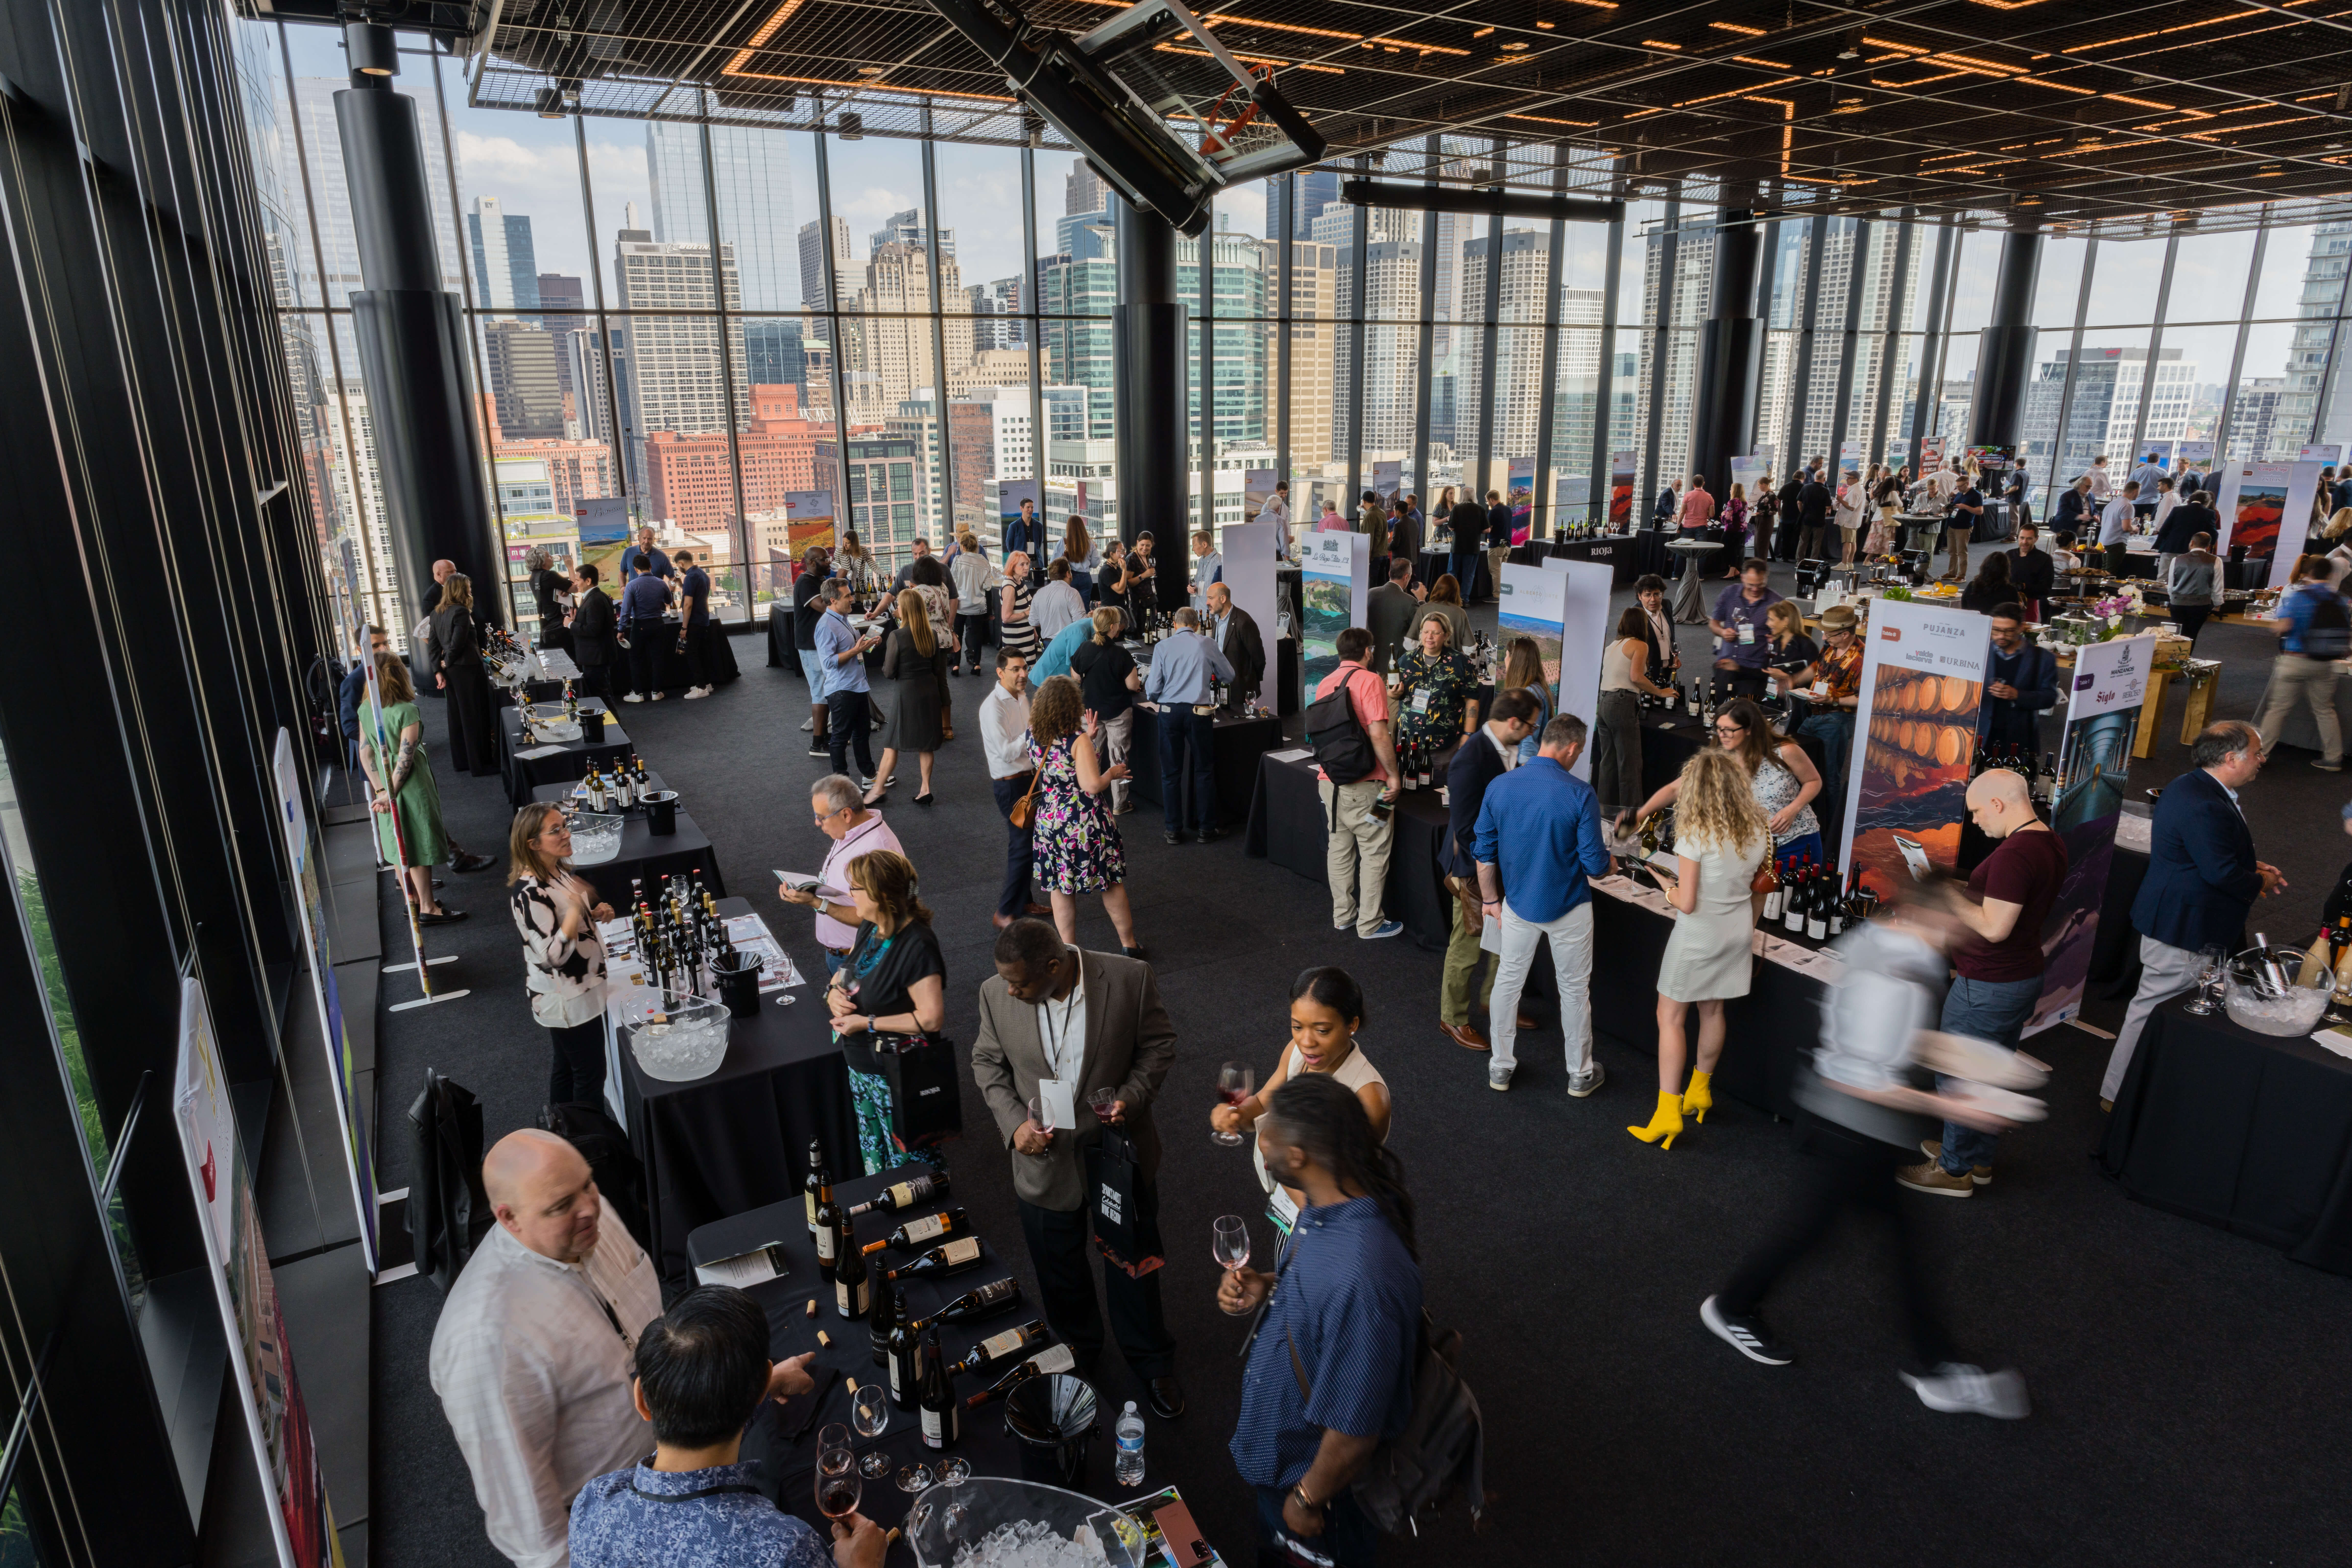 Overhead shot of a crowded room of people tasting wine